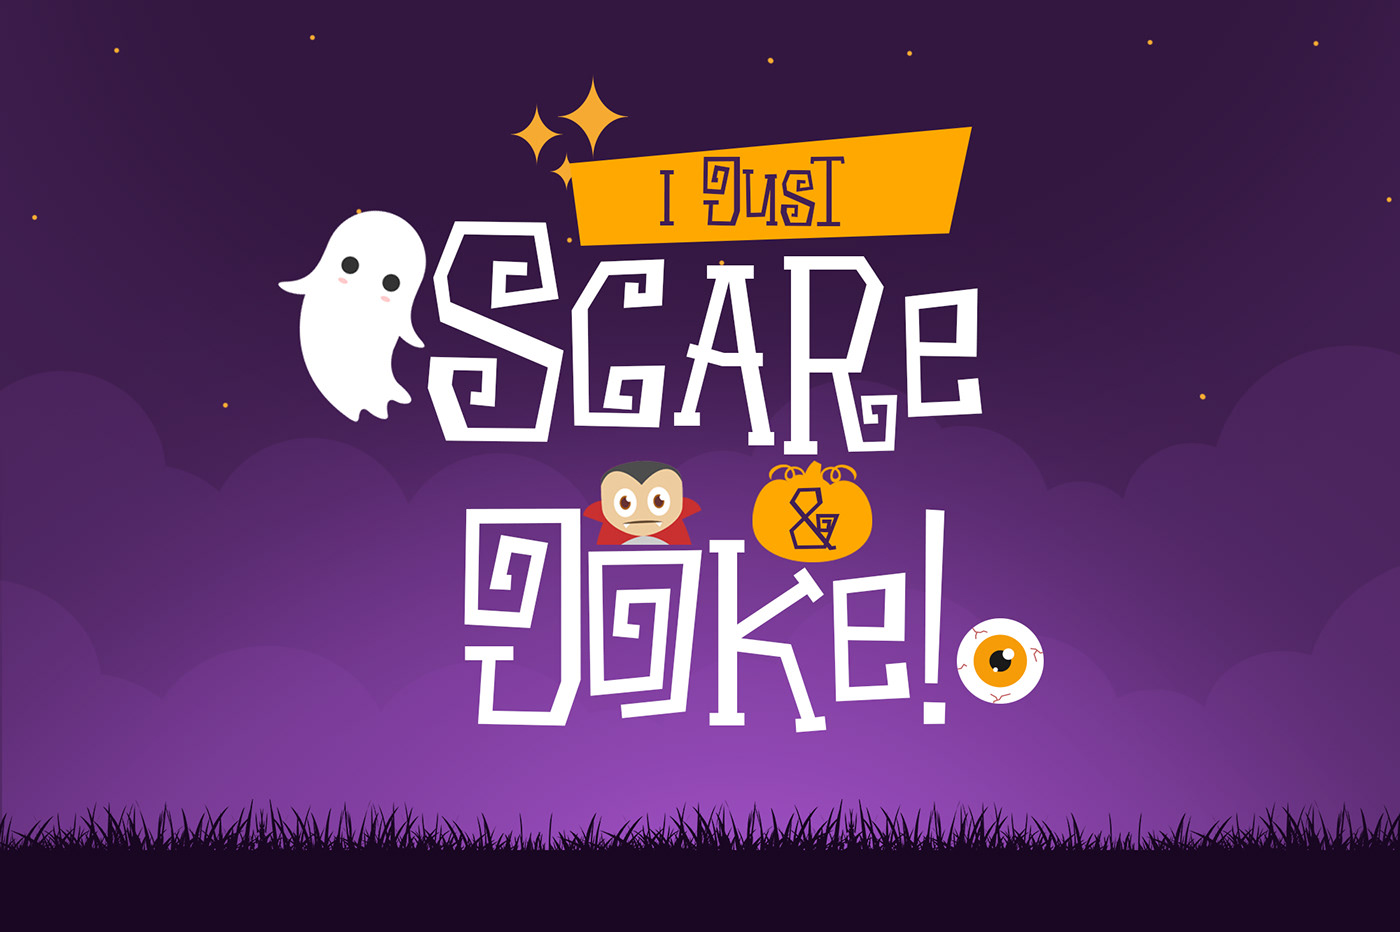 Example font Halloween Attack #1